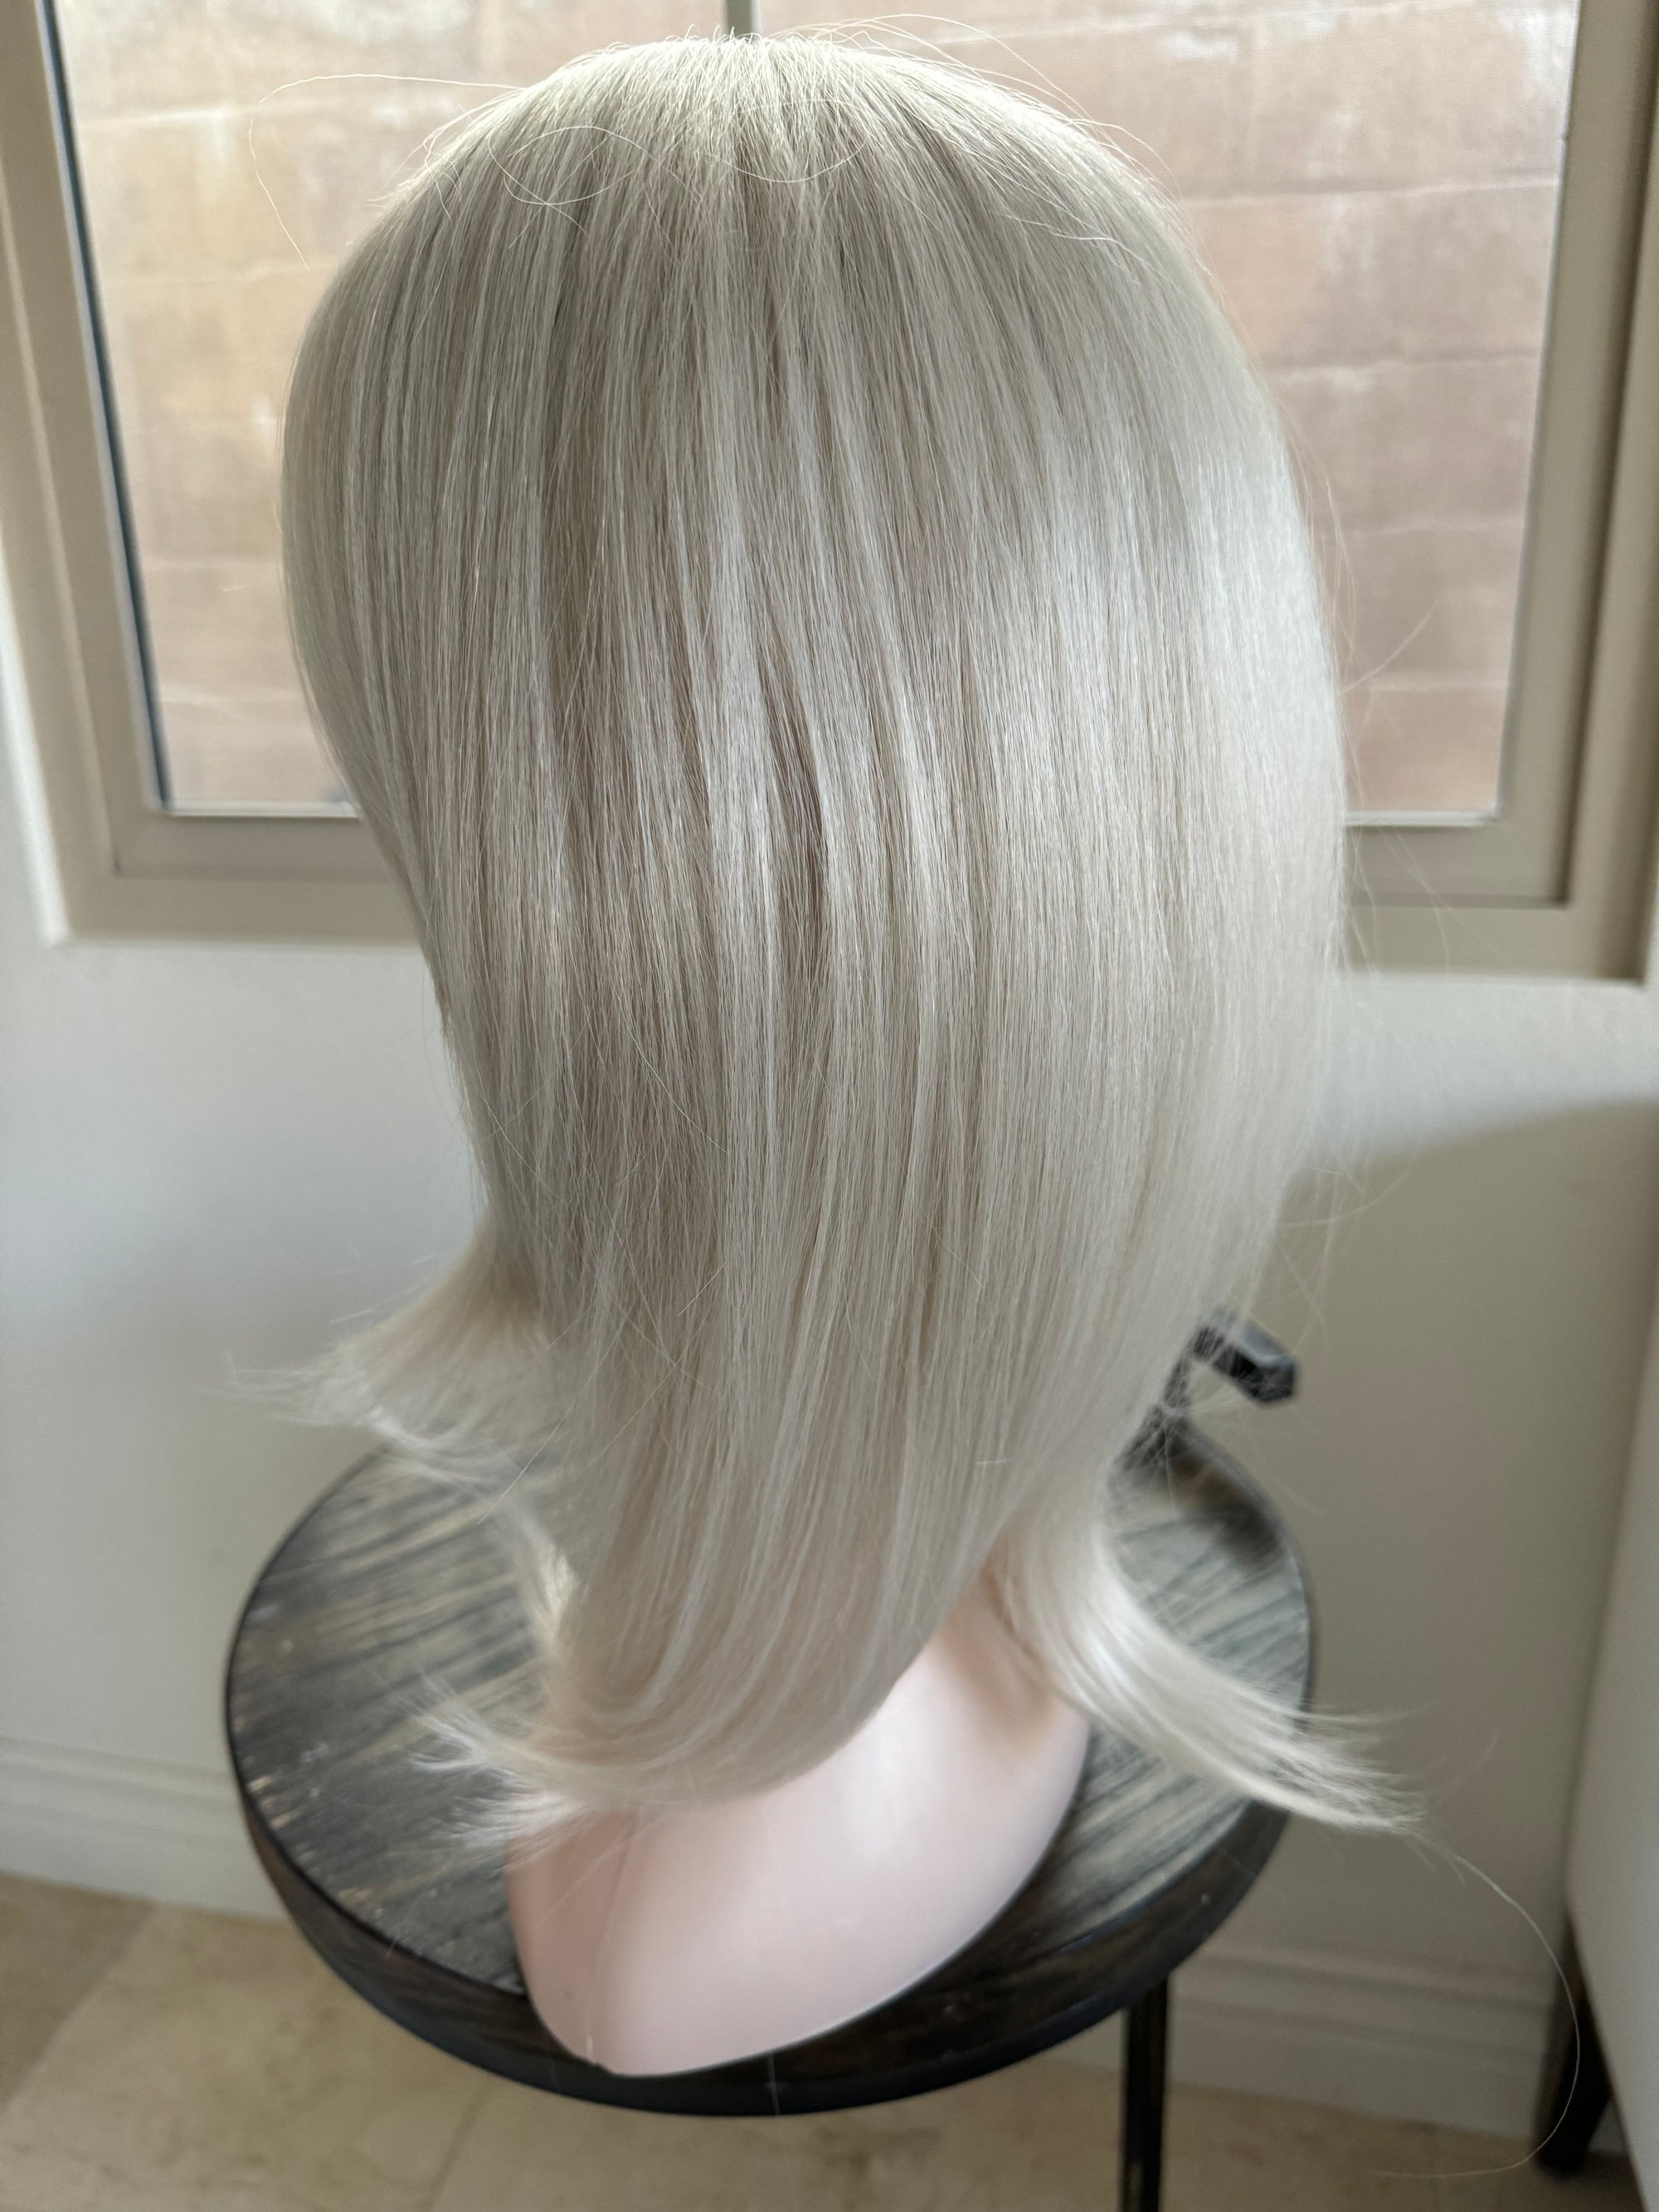 Tillstyle white blonde topper with bangs